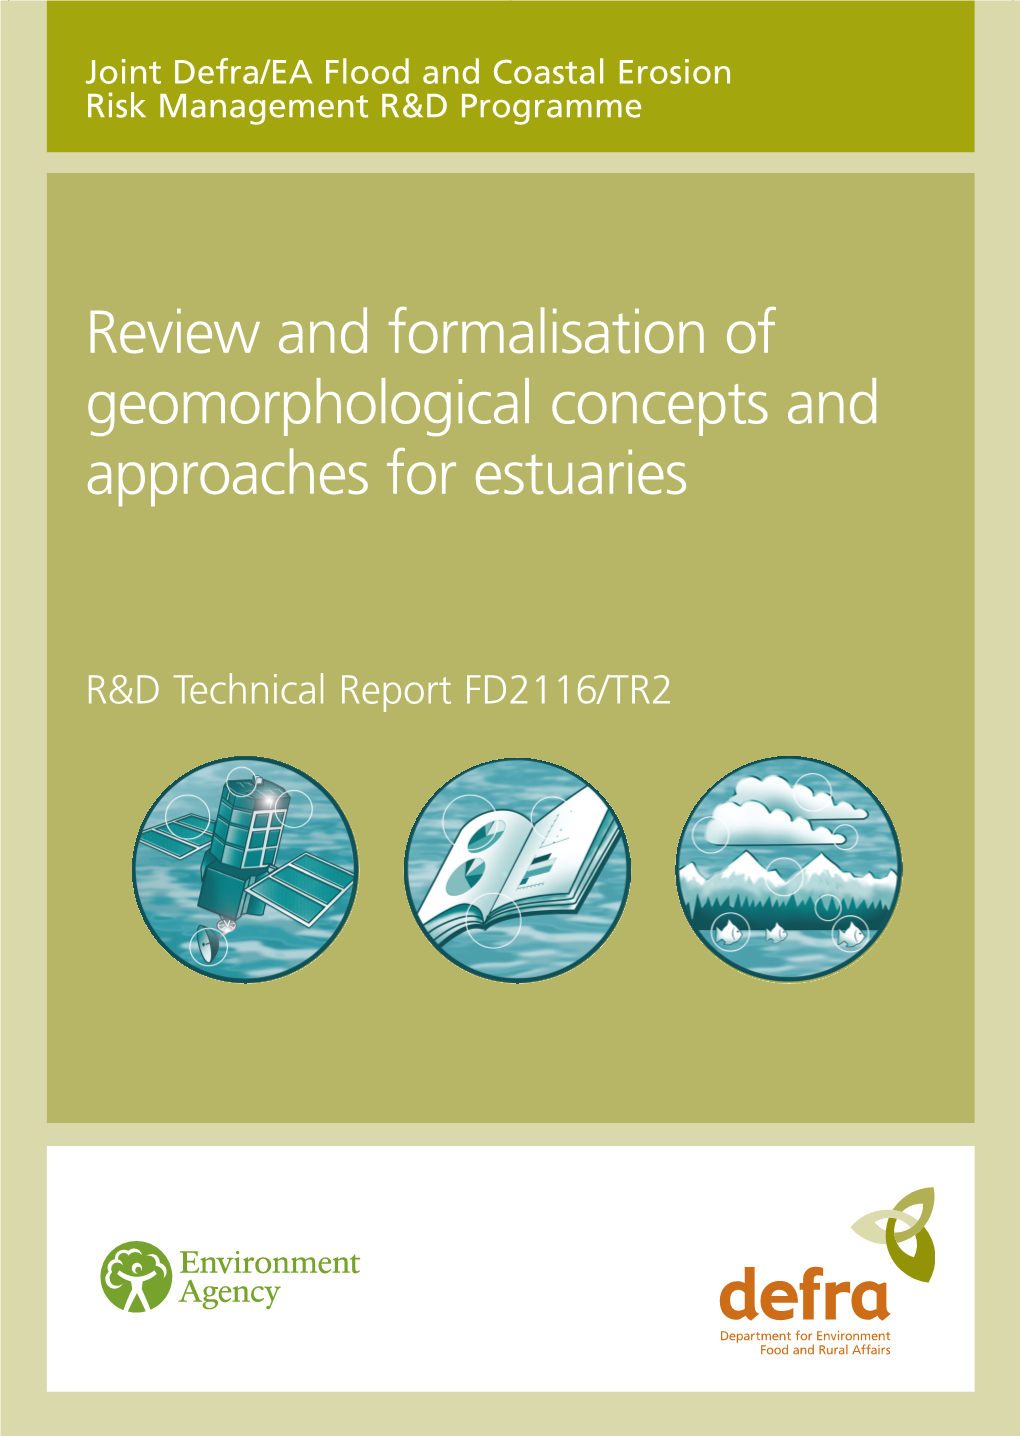 Review and Formalisation of Geomorphological Concepts and Approaches for Estuaries